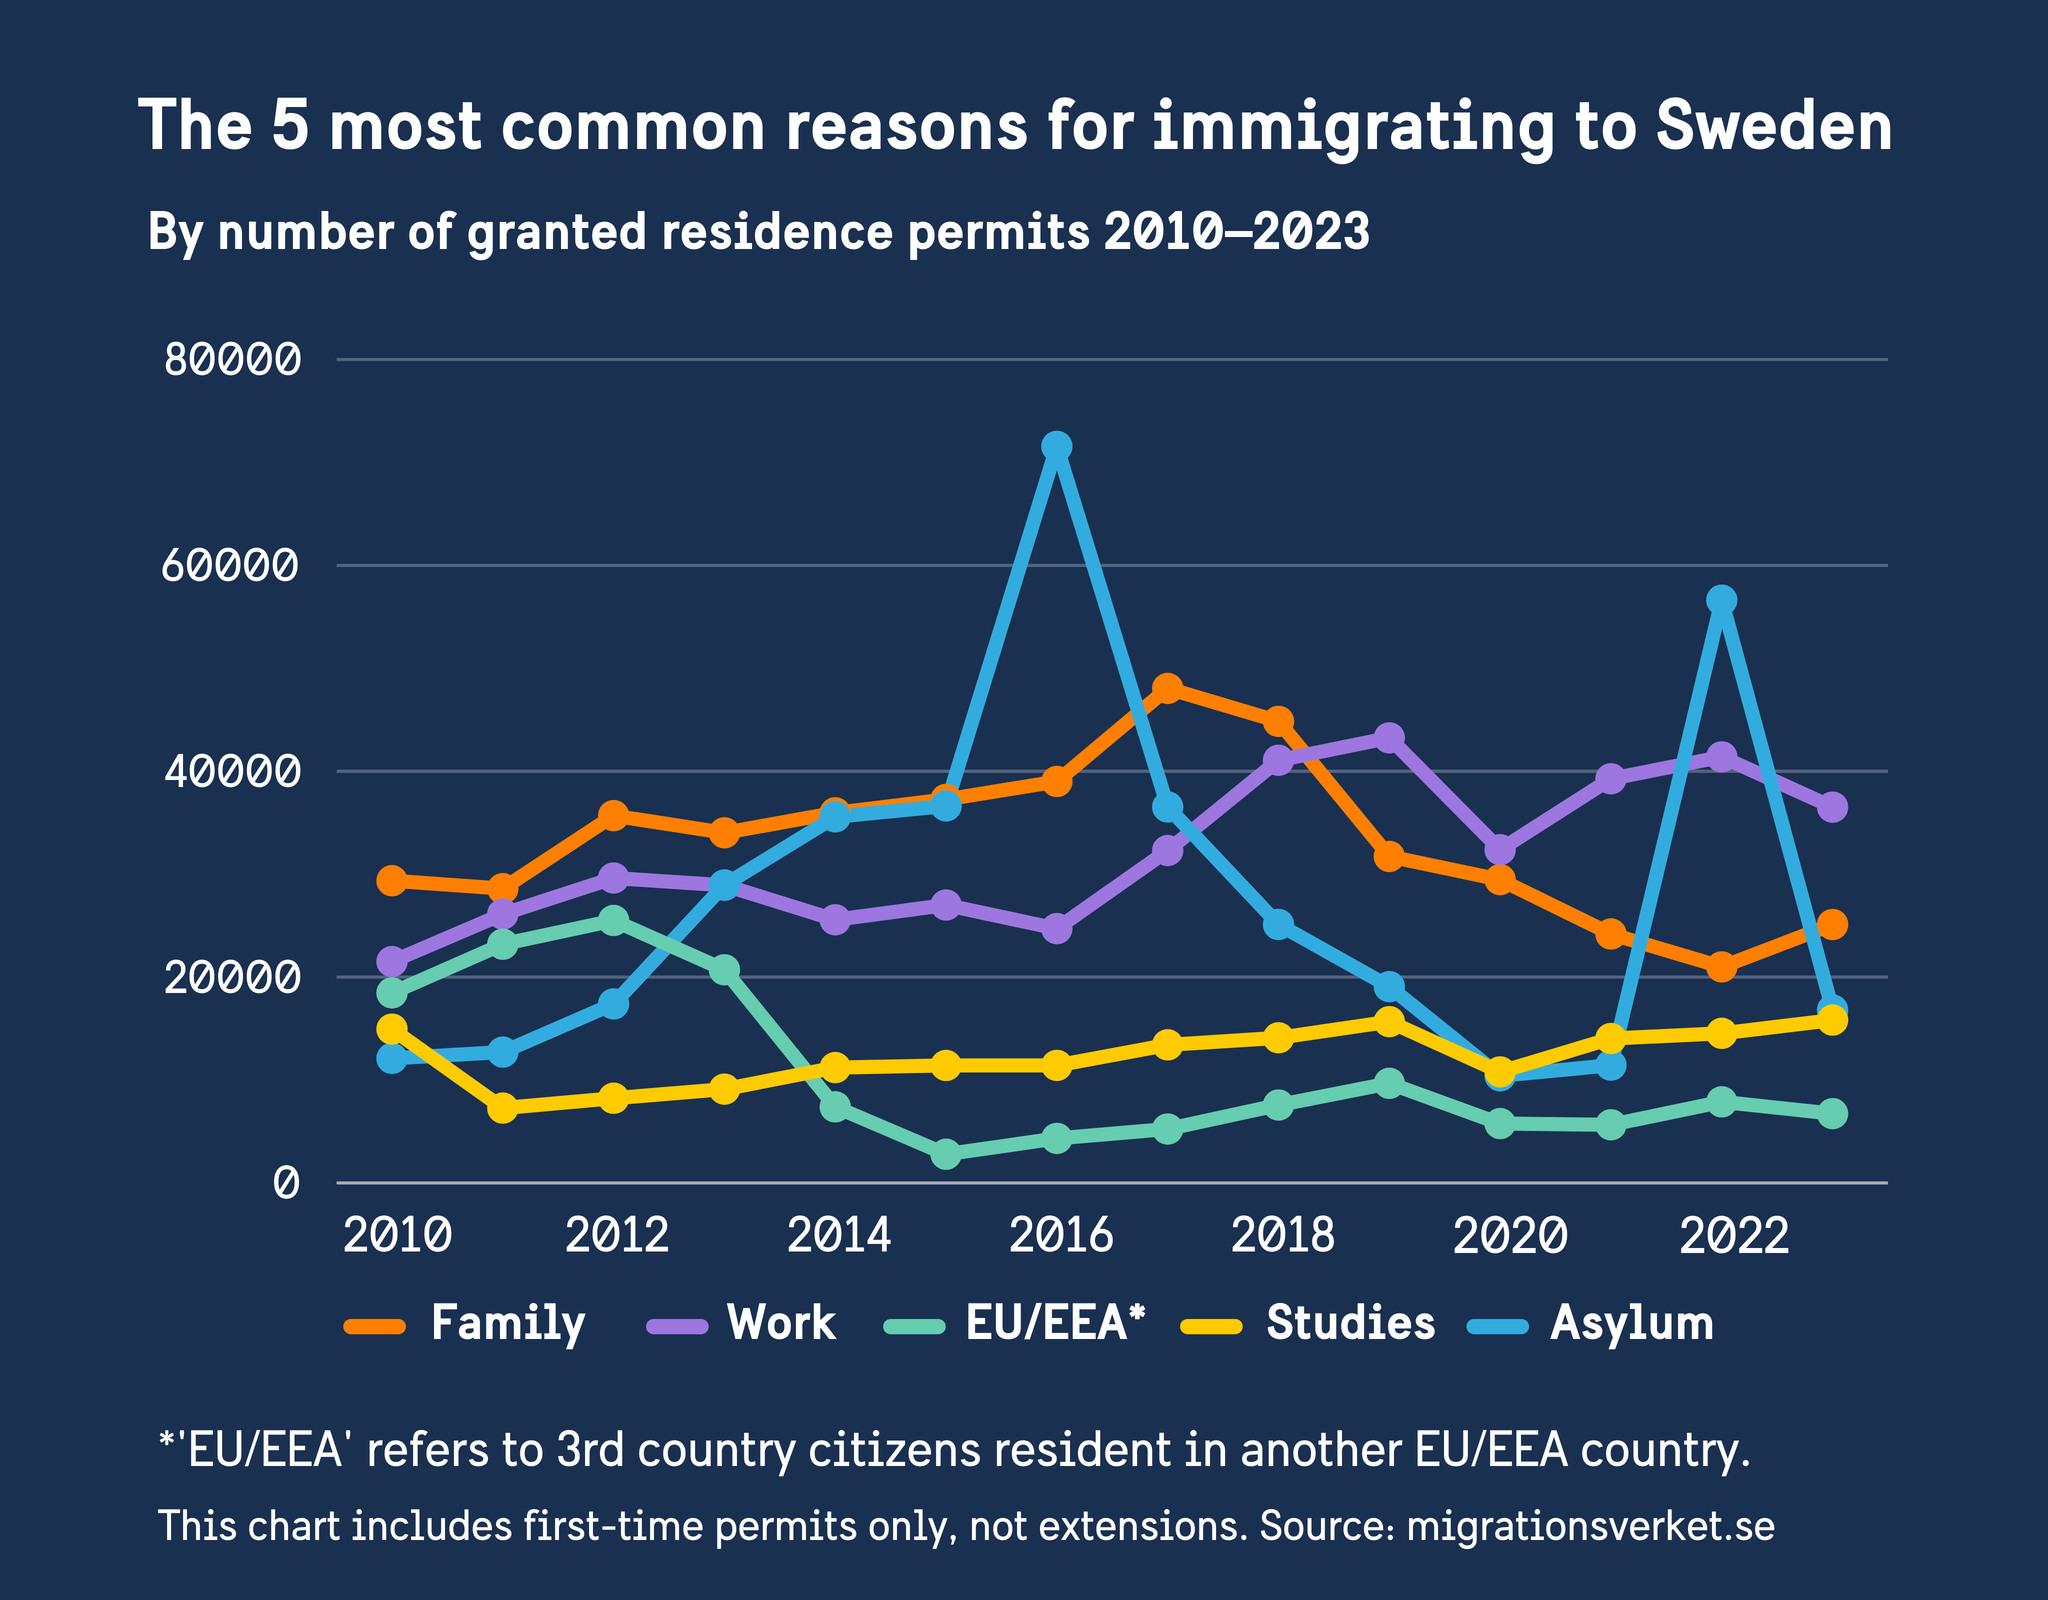 Chart showing the most common reasons for immigrating to Sweden: work, family, EU/EEA, studies, asylum.